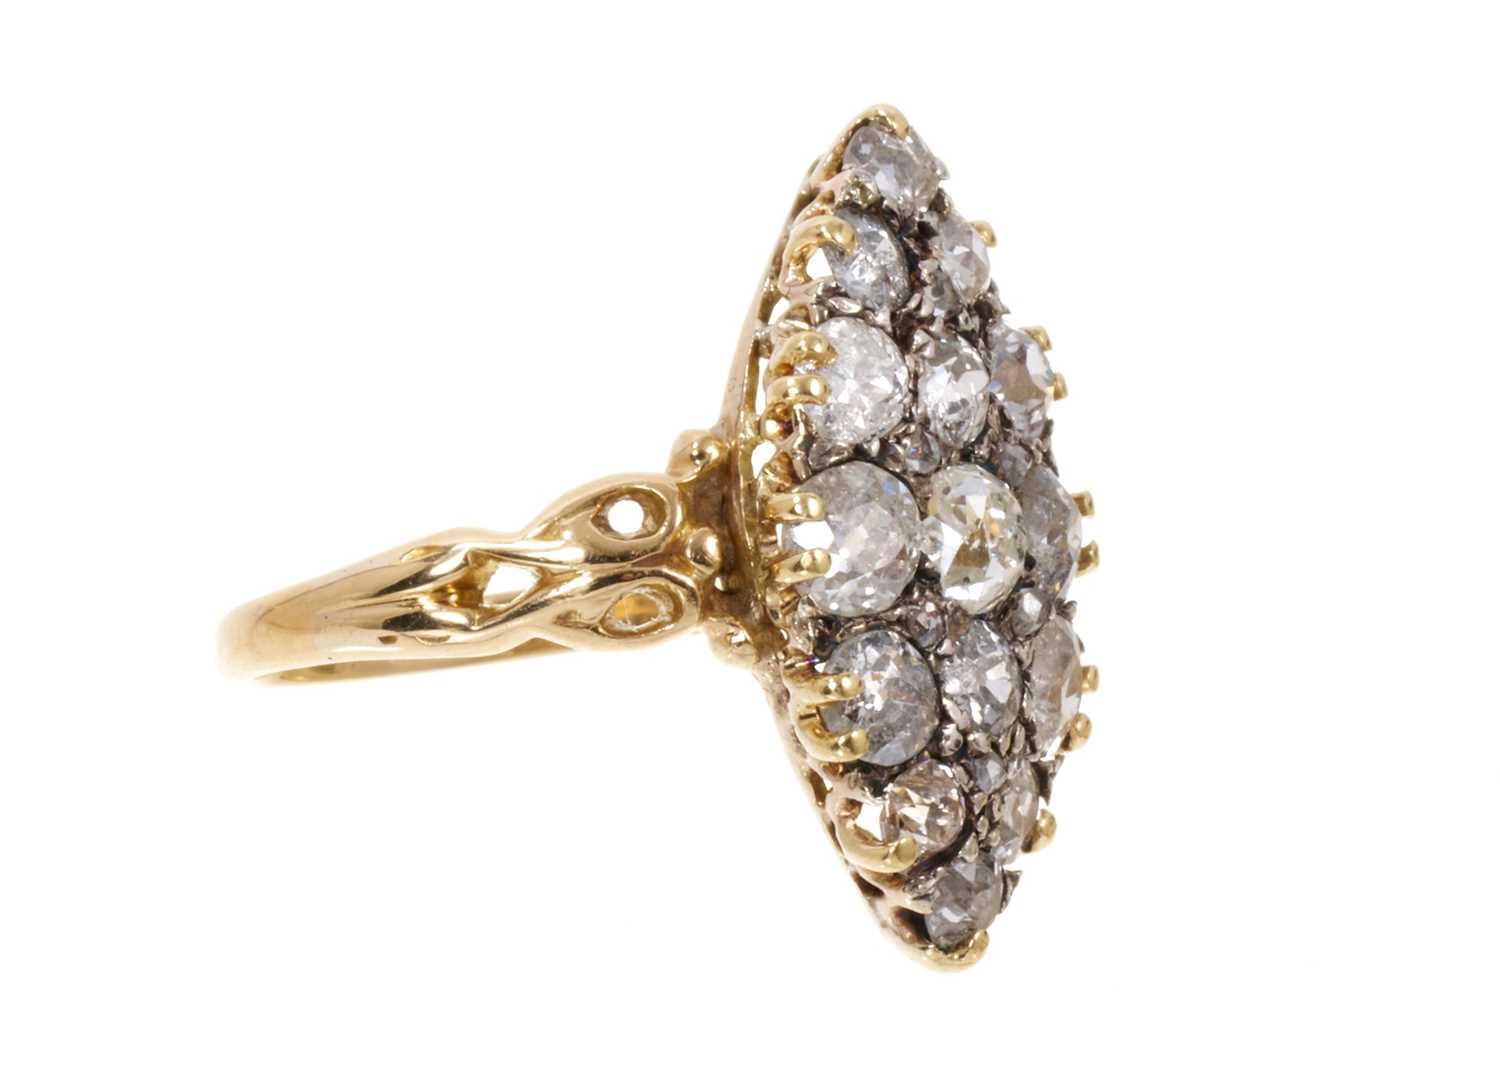 Victorian diamond navette form ring - Image 2 of 3